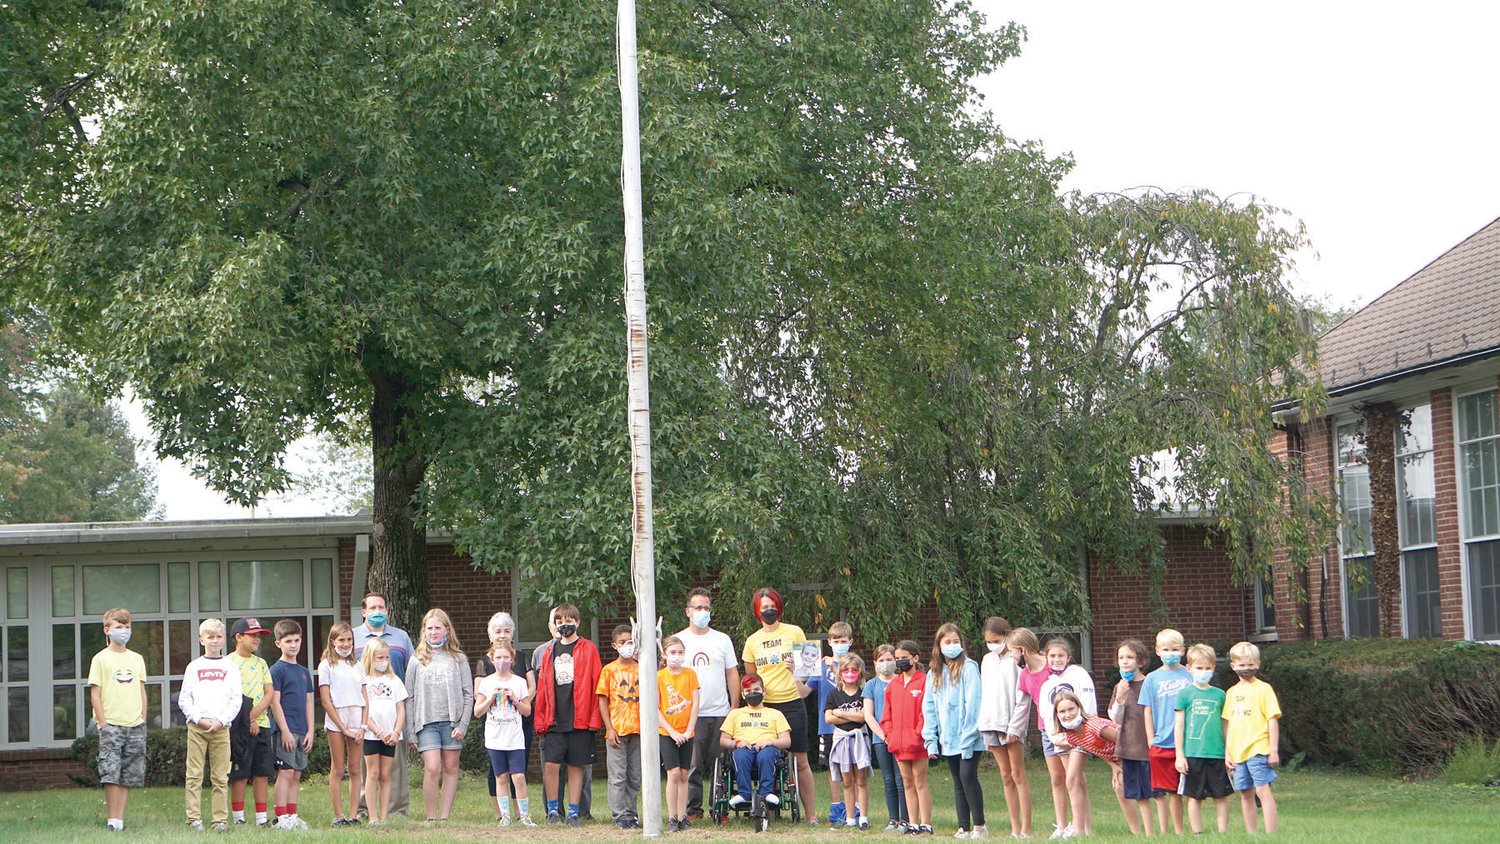 Kutz Elementary students and members of Dominic Liples’ family gather around the flagpole, where daffodil bulbs were planted in memory of Dominic, who passed away from brain cancer in 2016.